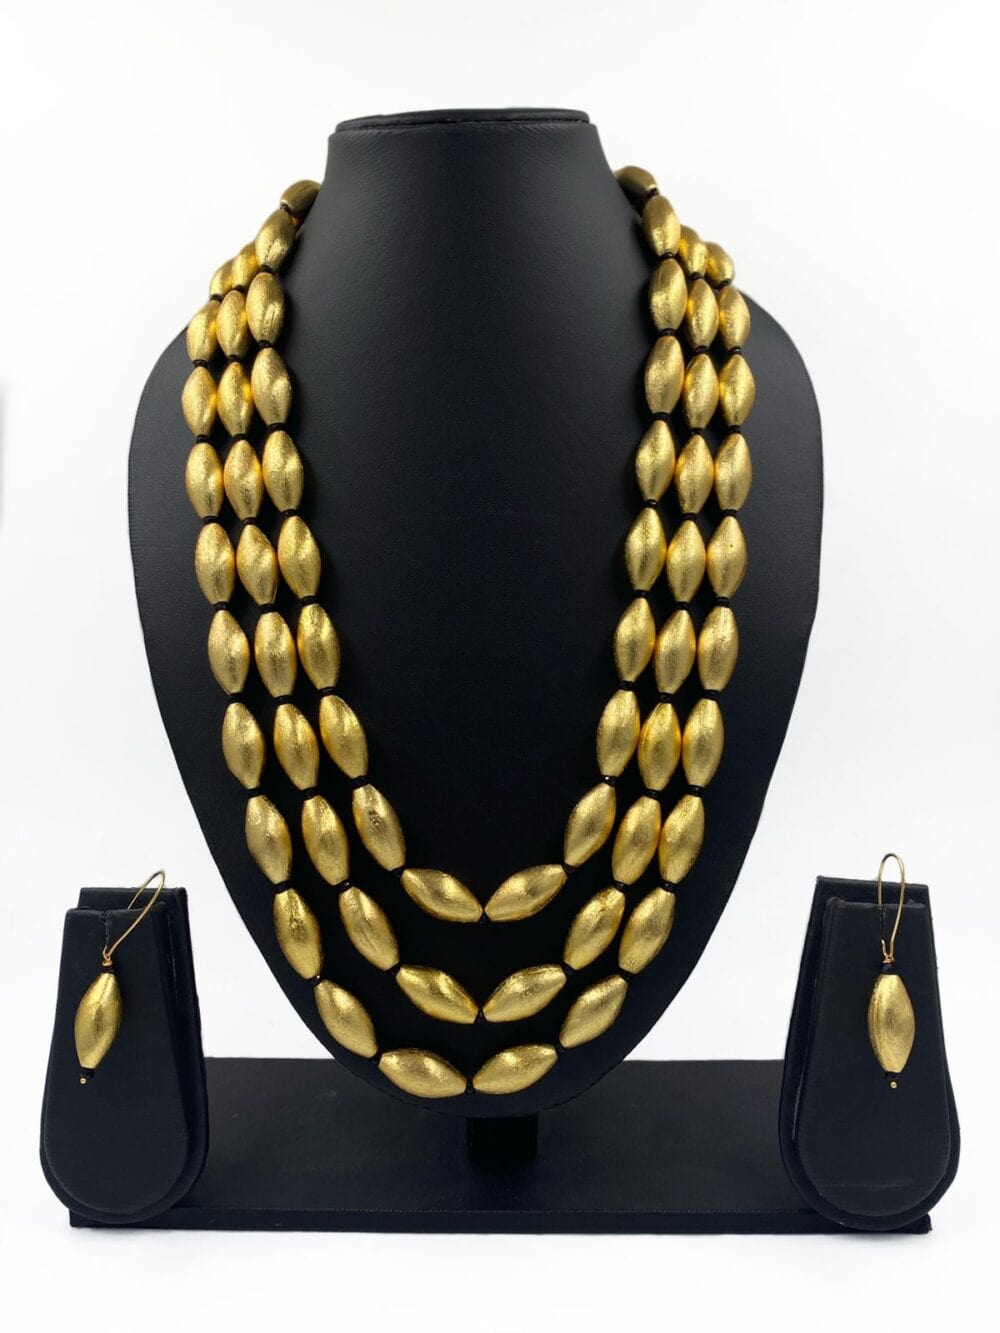 Triple Layered Handcrafted Gold Toned Dholki Beads Necklace Set By Gehna Shop Golden Beads Jewellery